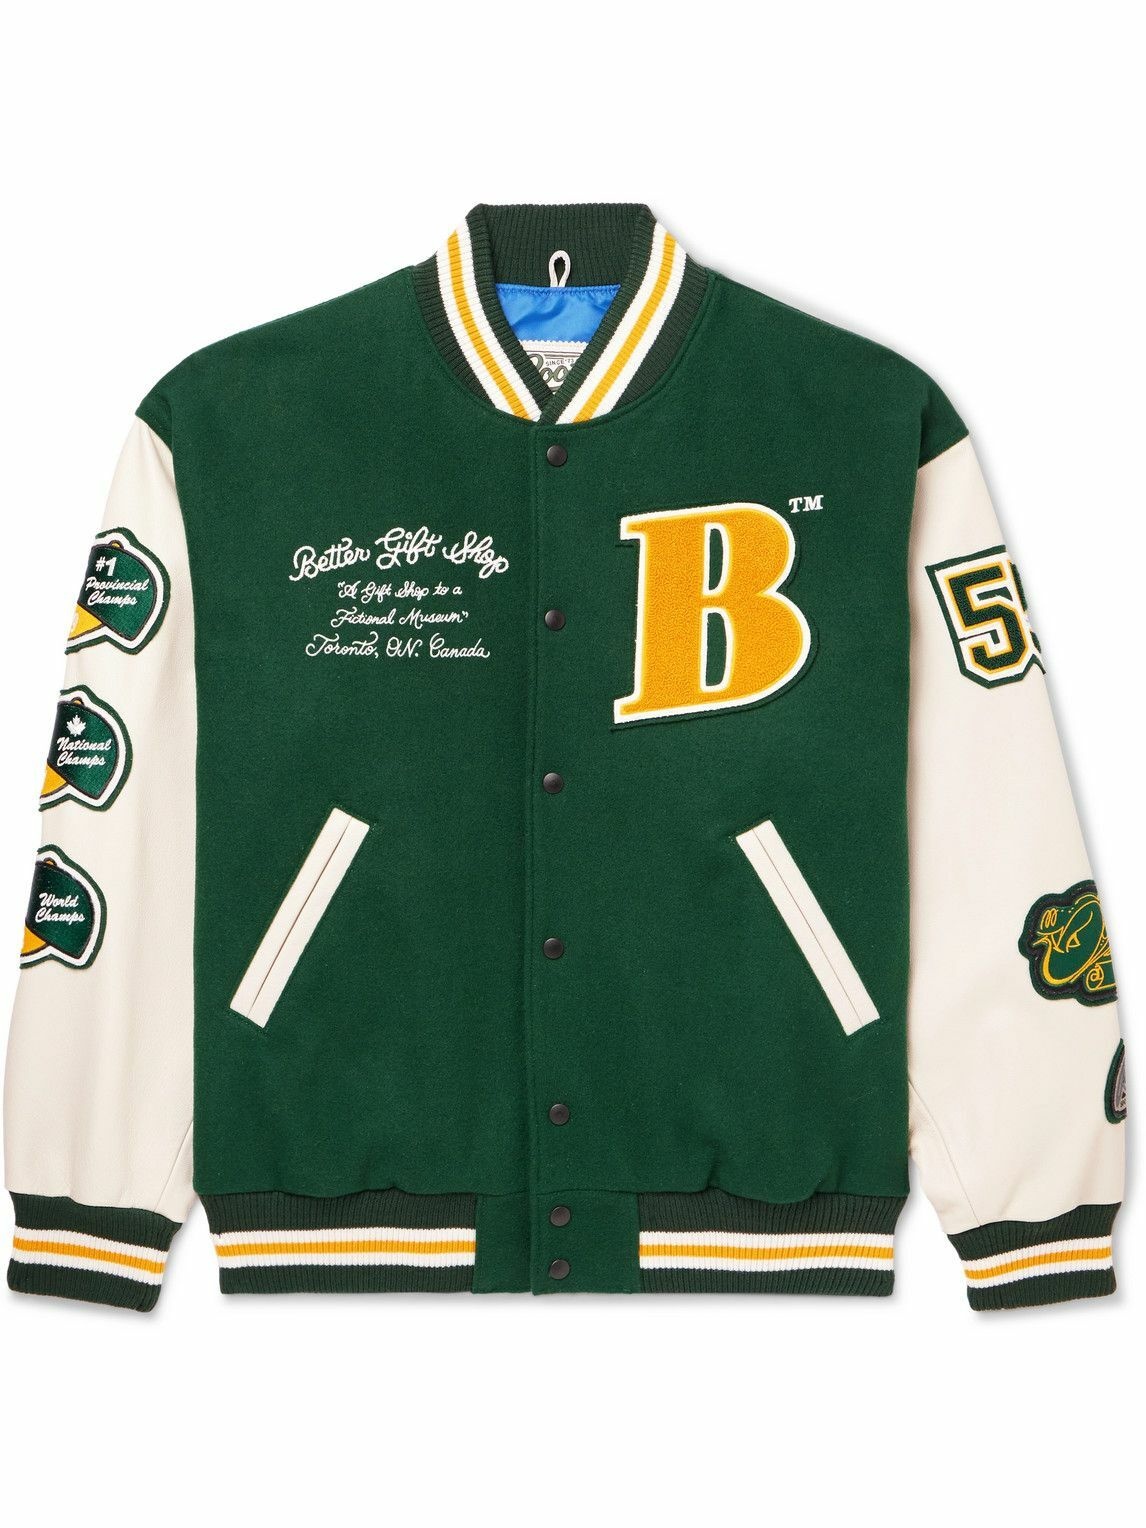 Photo: BETTER GIFT SHOP - Roots Gallery and Gift Shop Wool-Blend Felt and Leather Varsity Jacket - Green